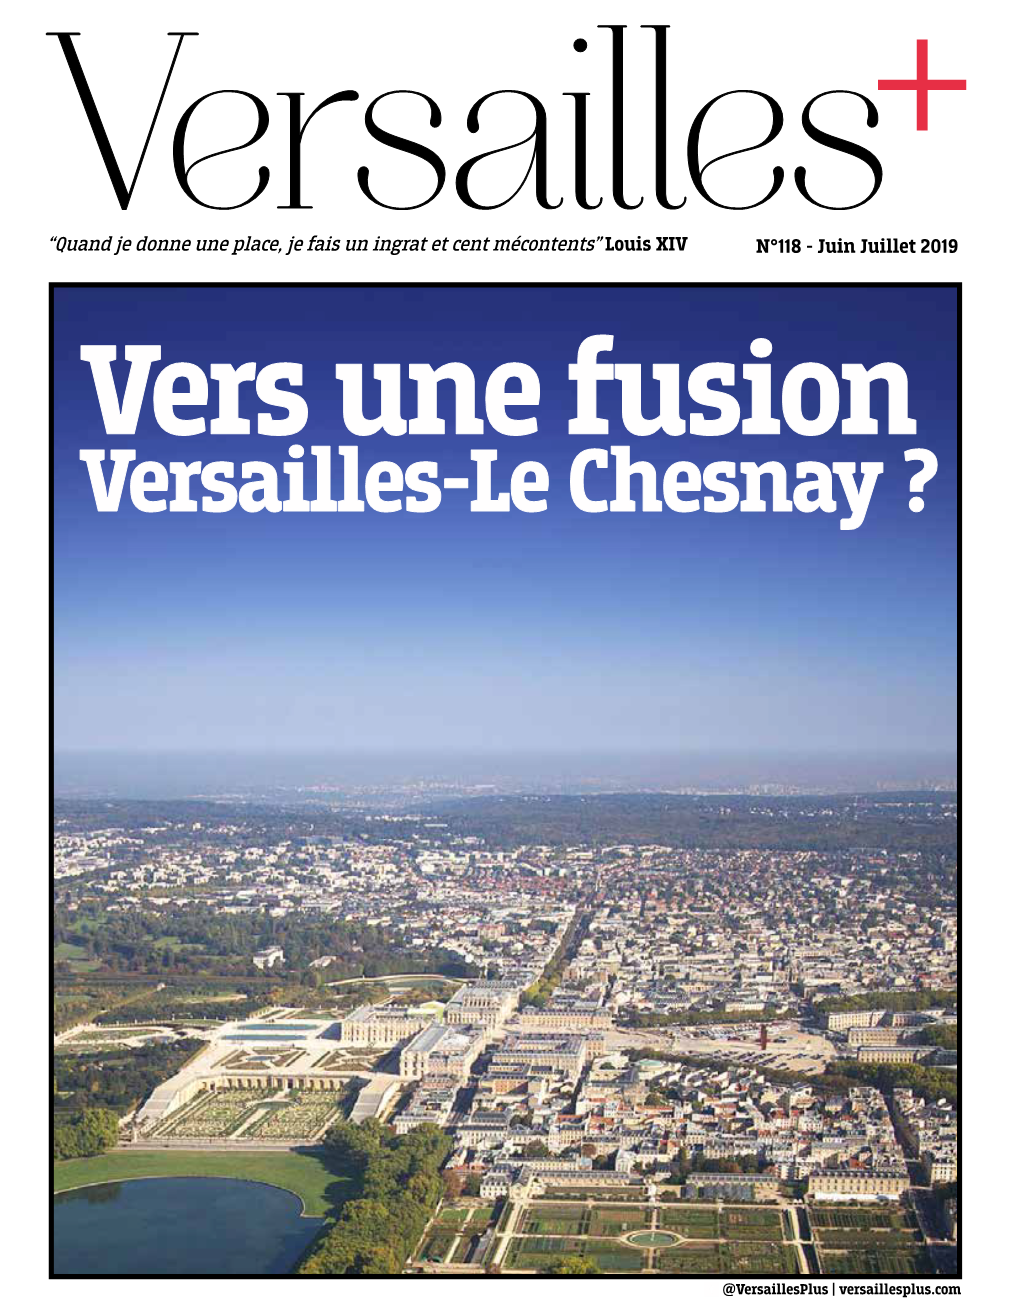 Vers Une Fusion Versailles-Le Chesnay ?